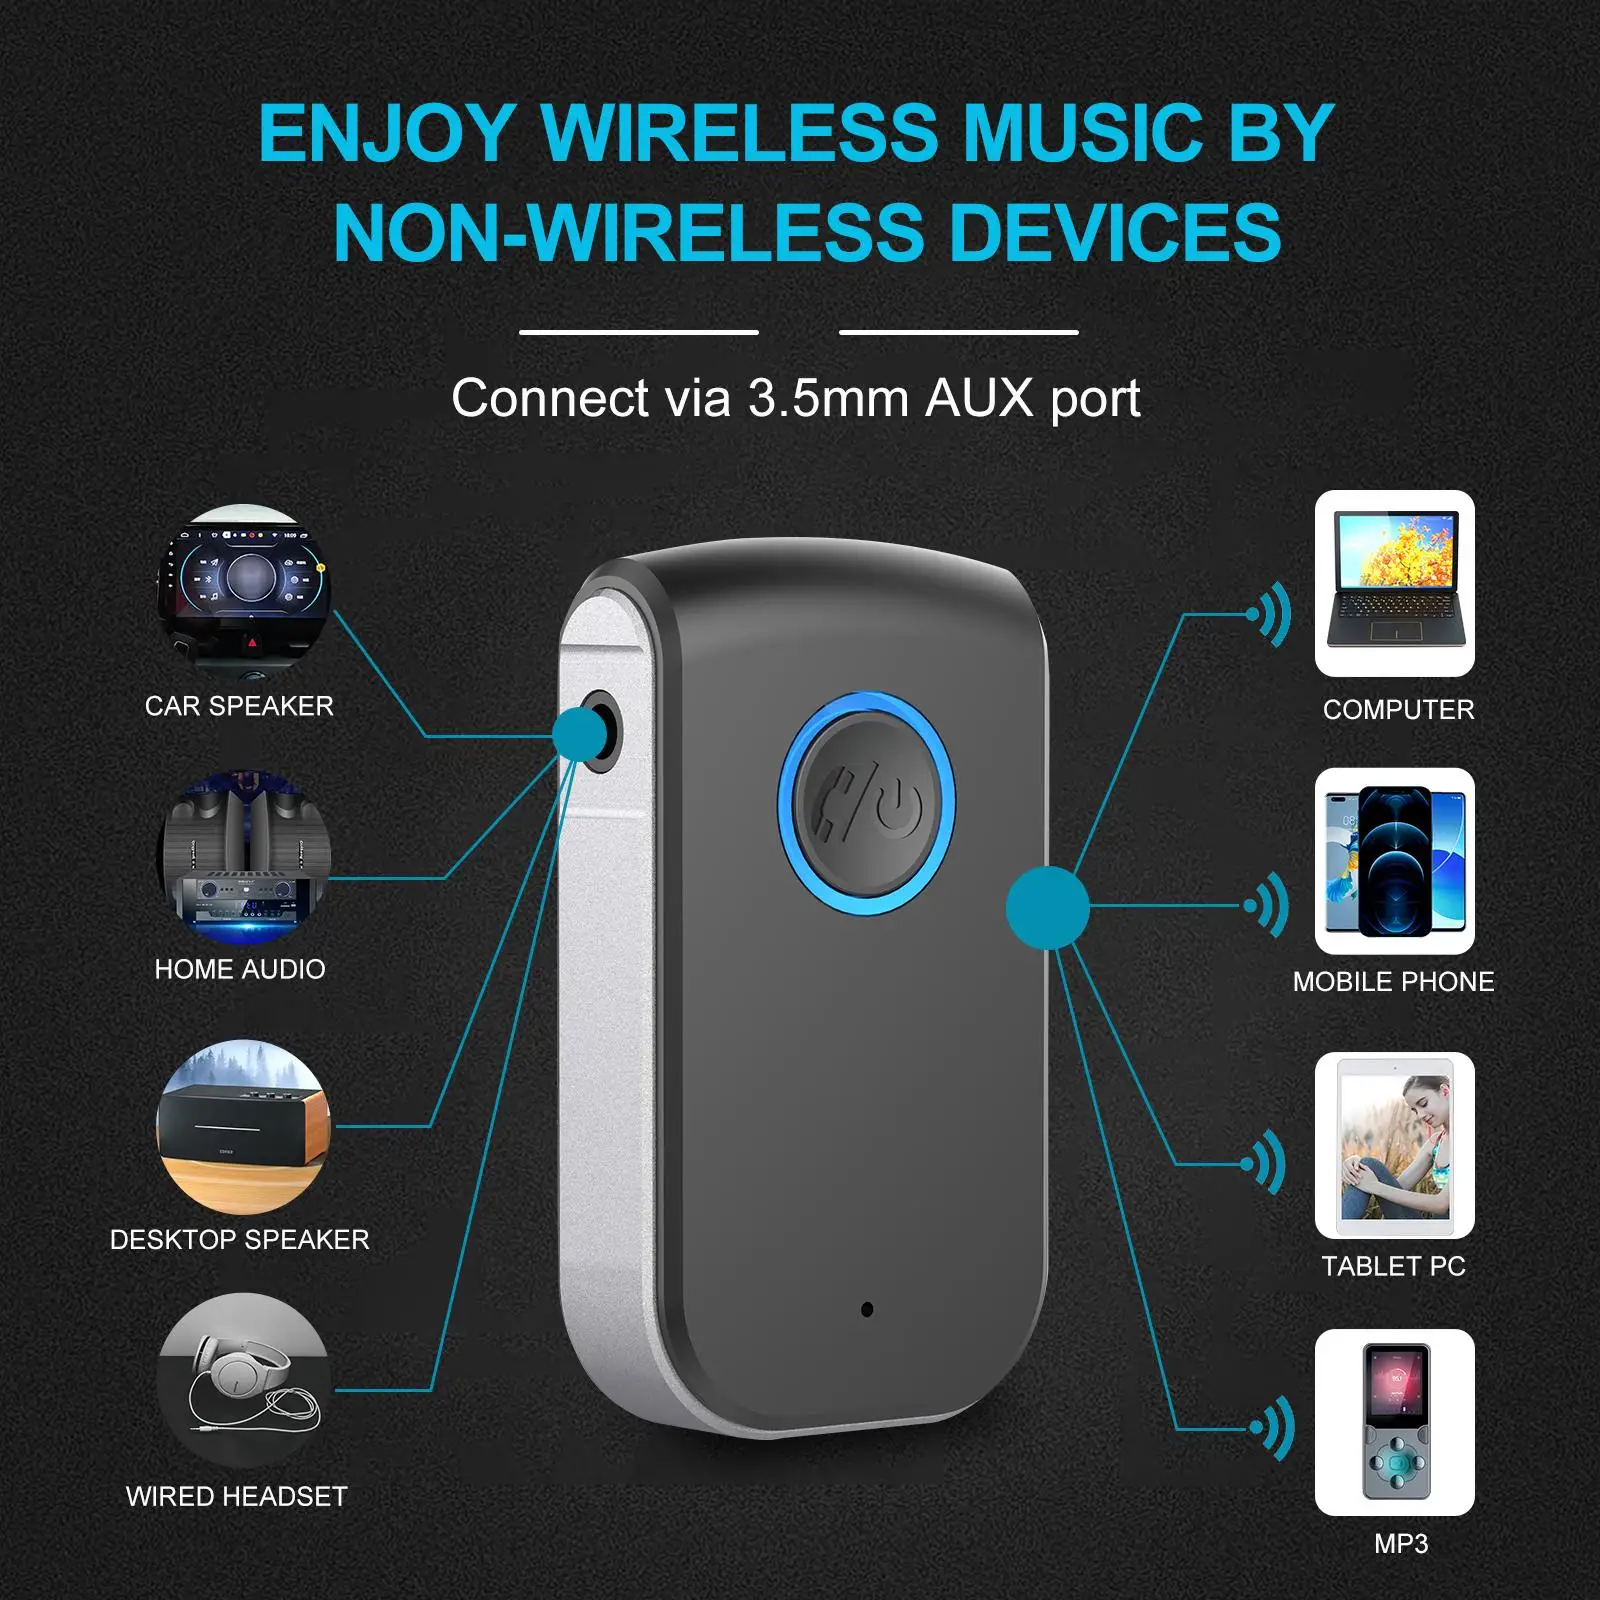 Bluetooth AUX Receiver Wireless Audio Receiver 3.5mm AUX for Home Stereo